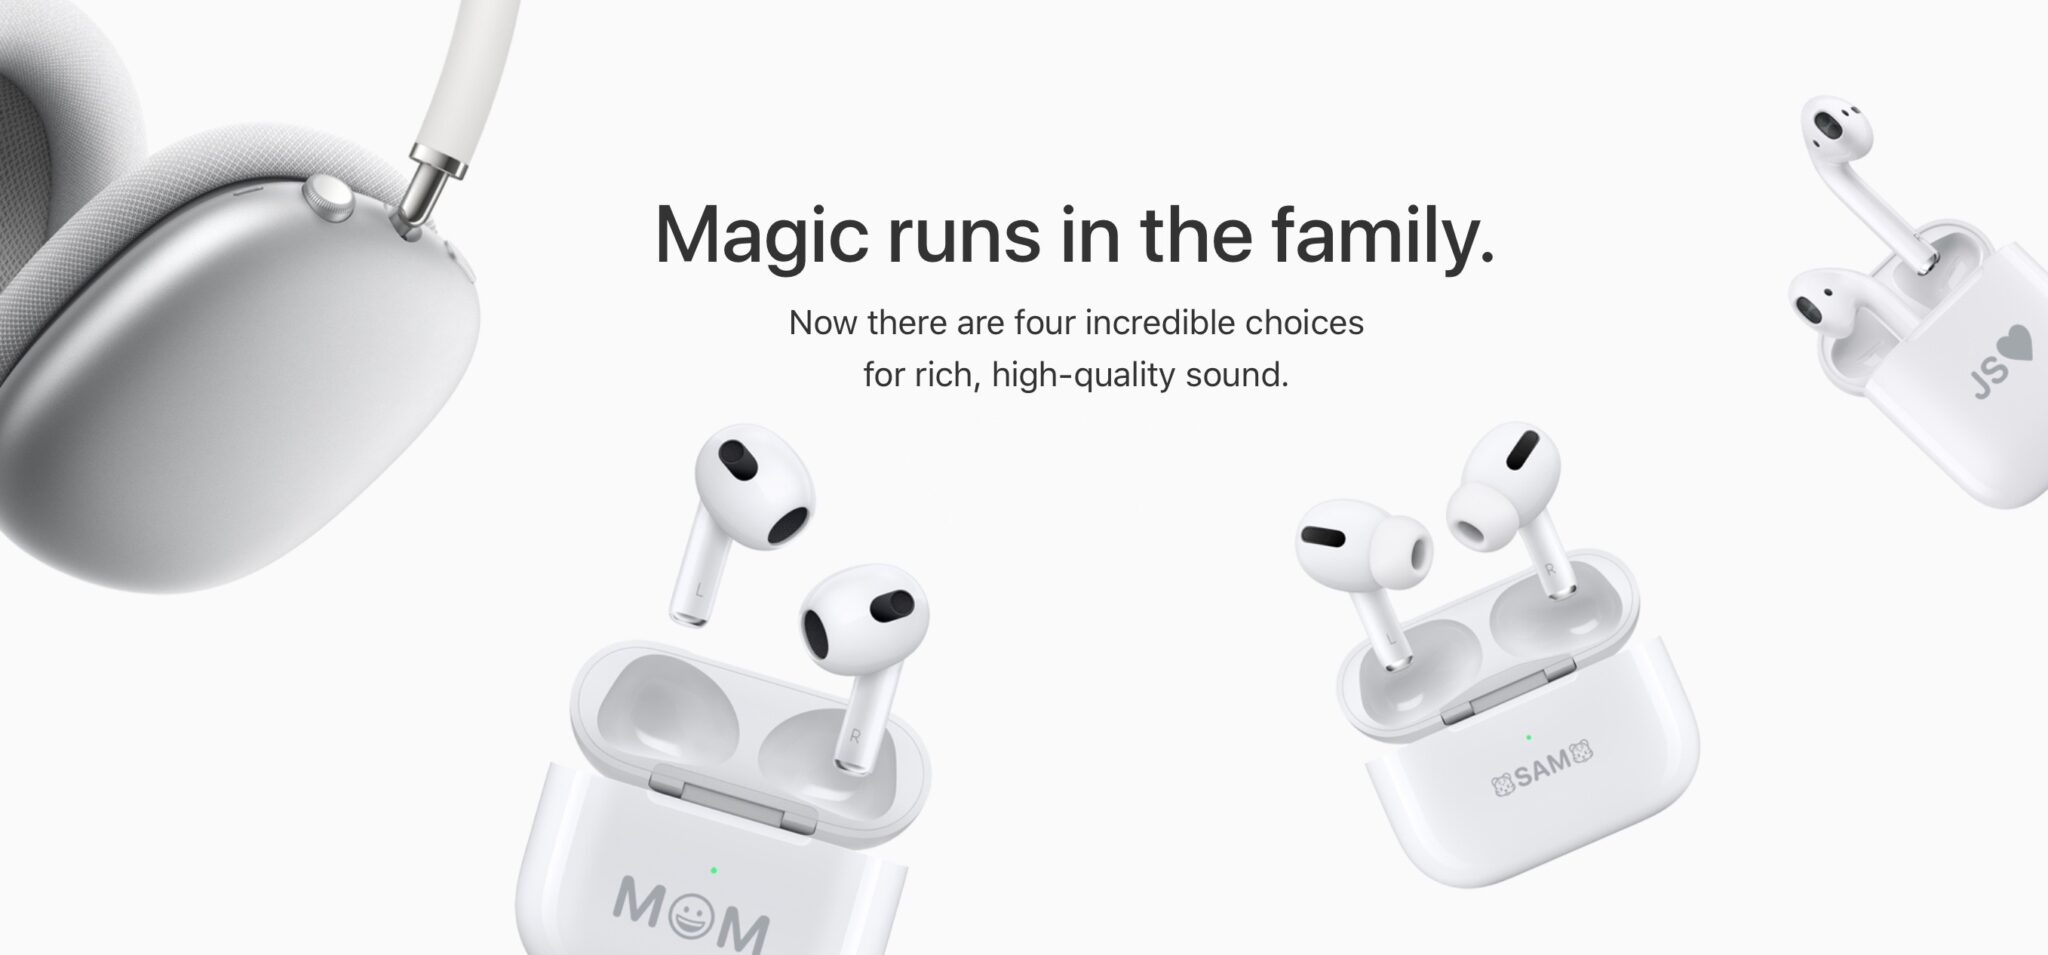 AirPods 3 AirPods Max AirPods Pro with MagSafe Charging Case and AirPods 2 price in Nigeria